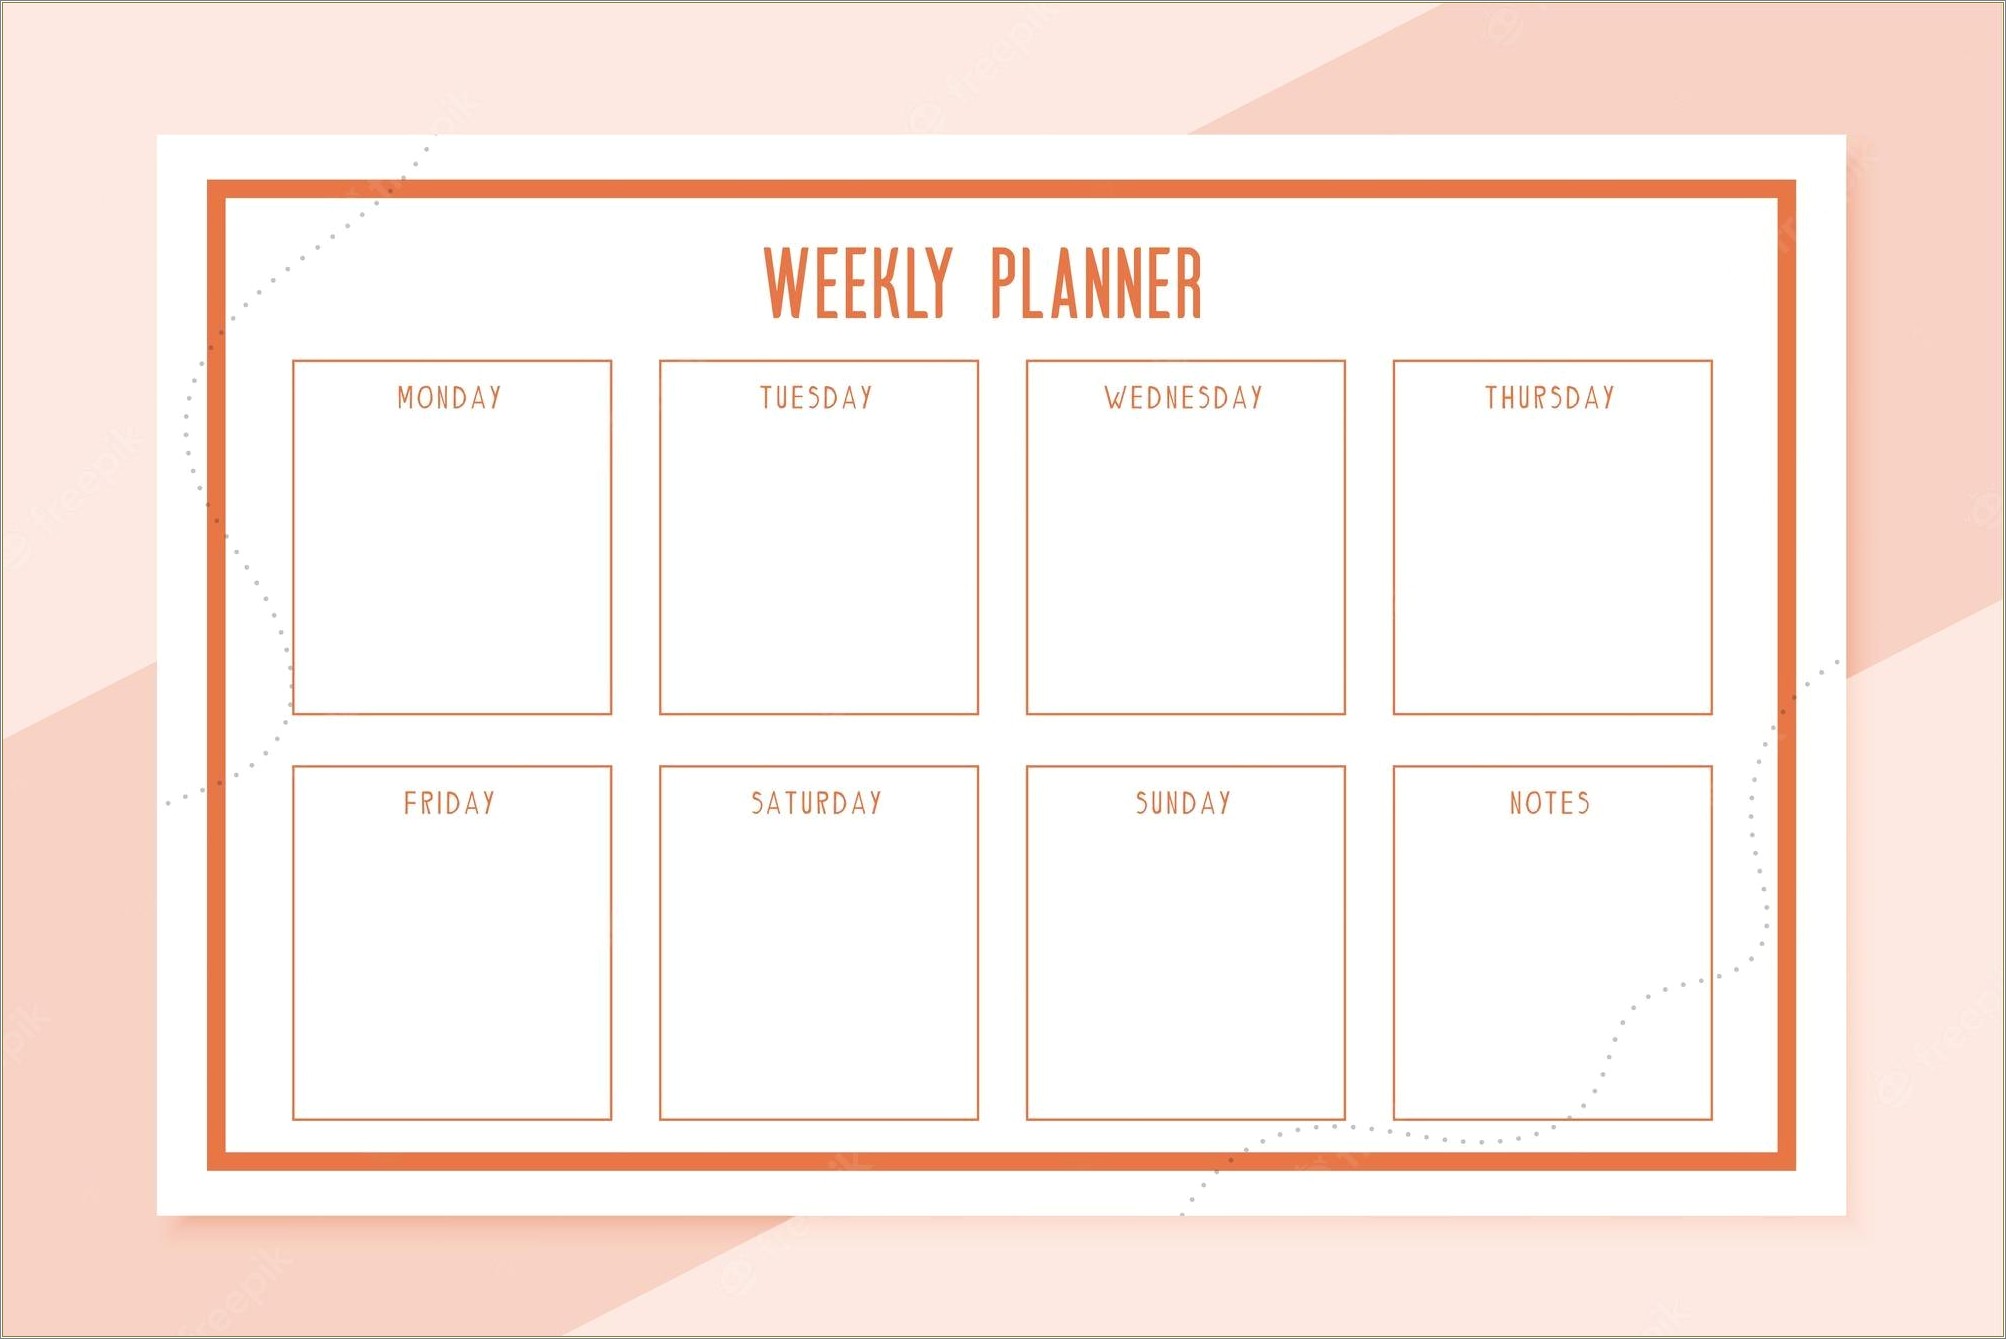 Free Weekly Planner Template Monday To Friday